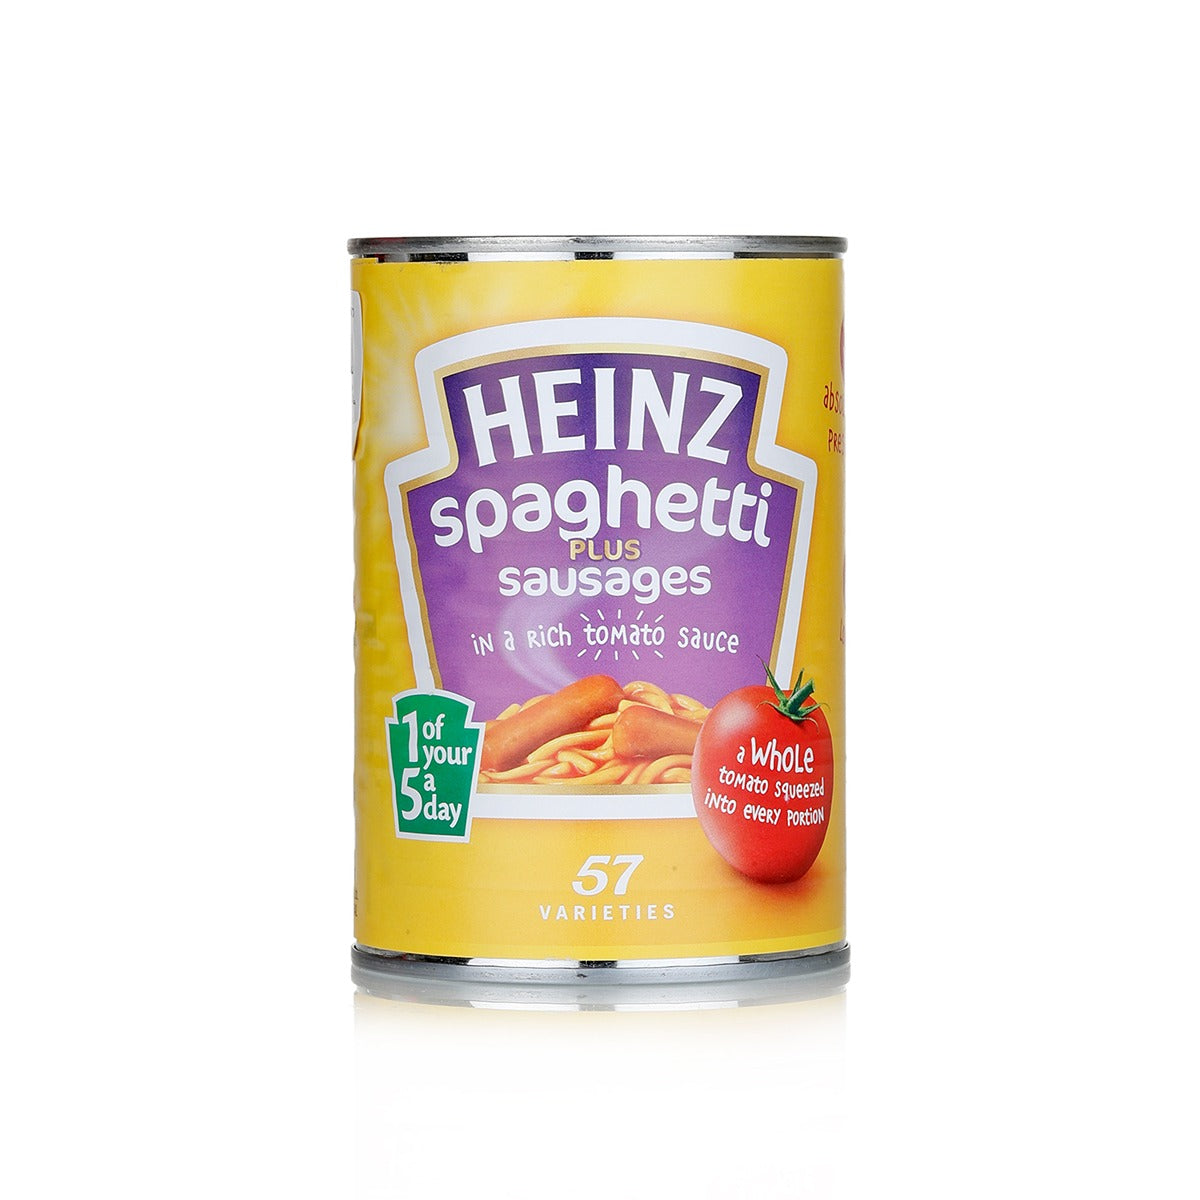 Heinz - Spaghetti & Sausages - 400g - Continental Food Store